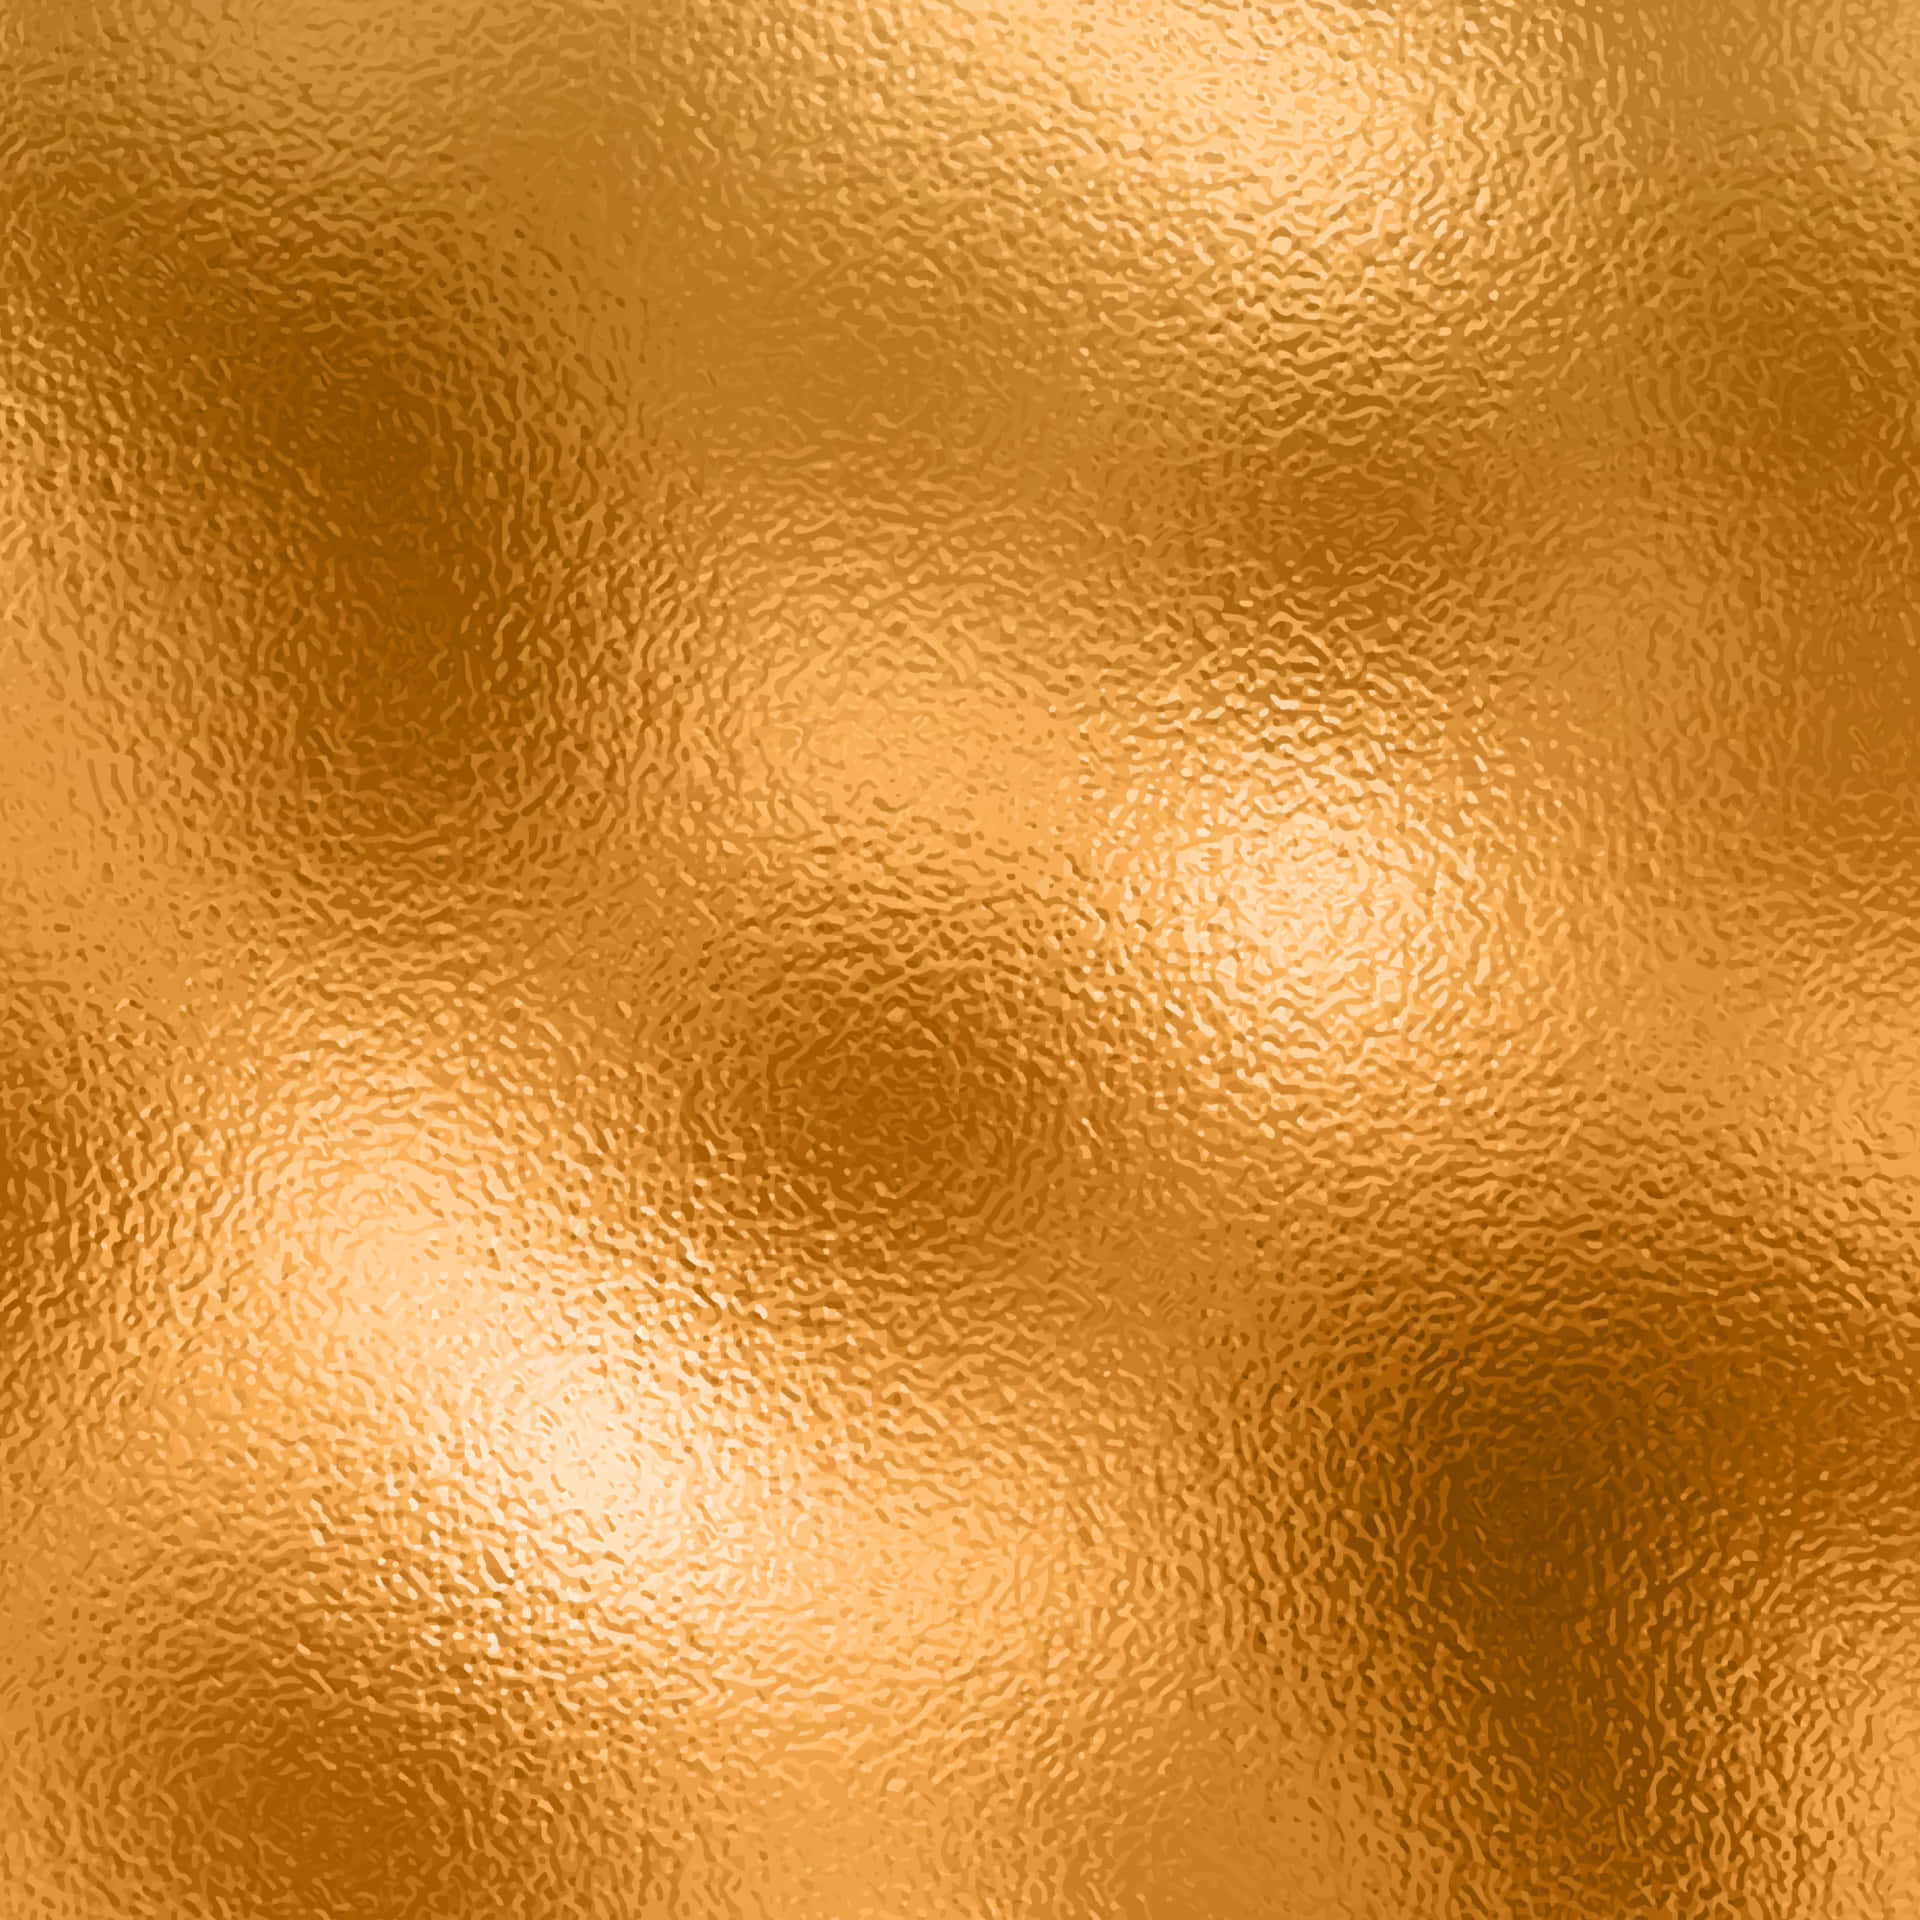 Shiny Foil Background in High Resolution